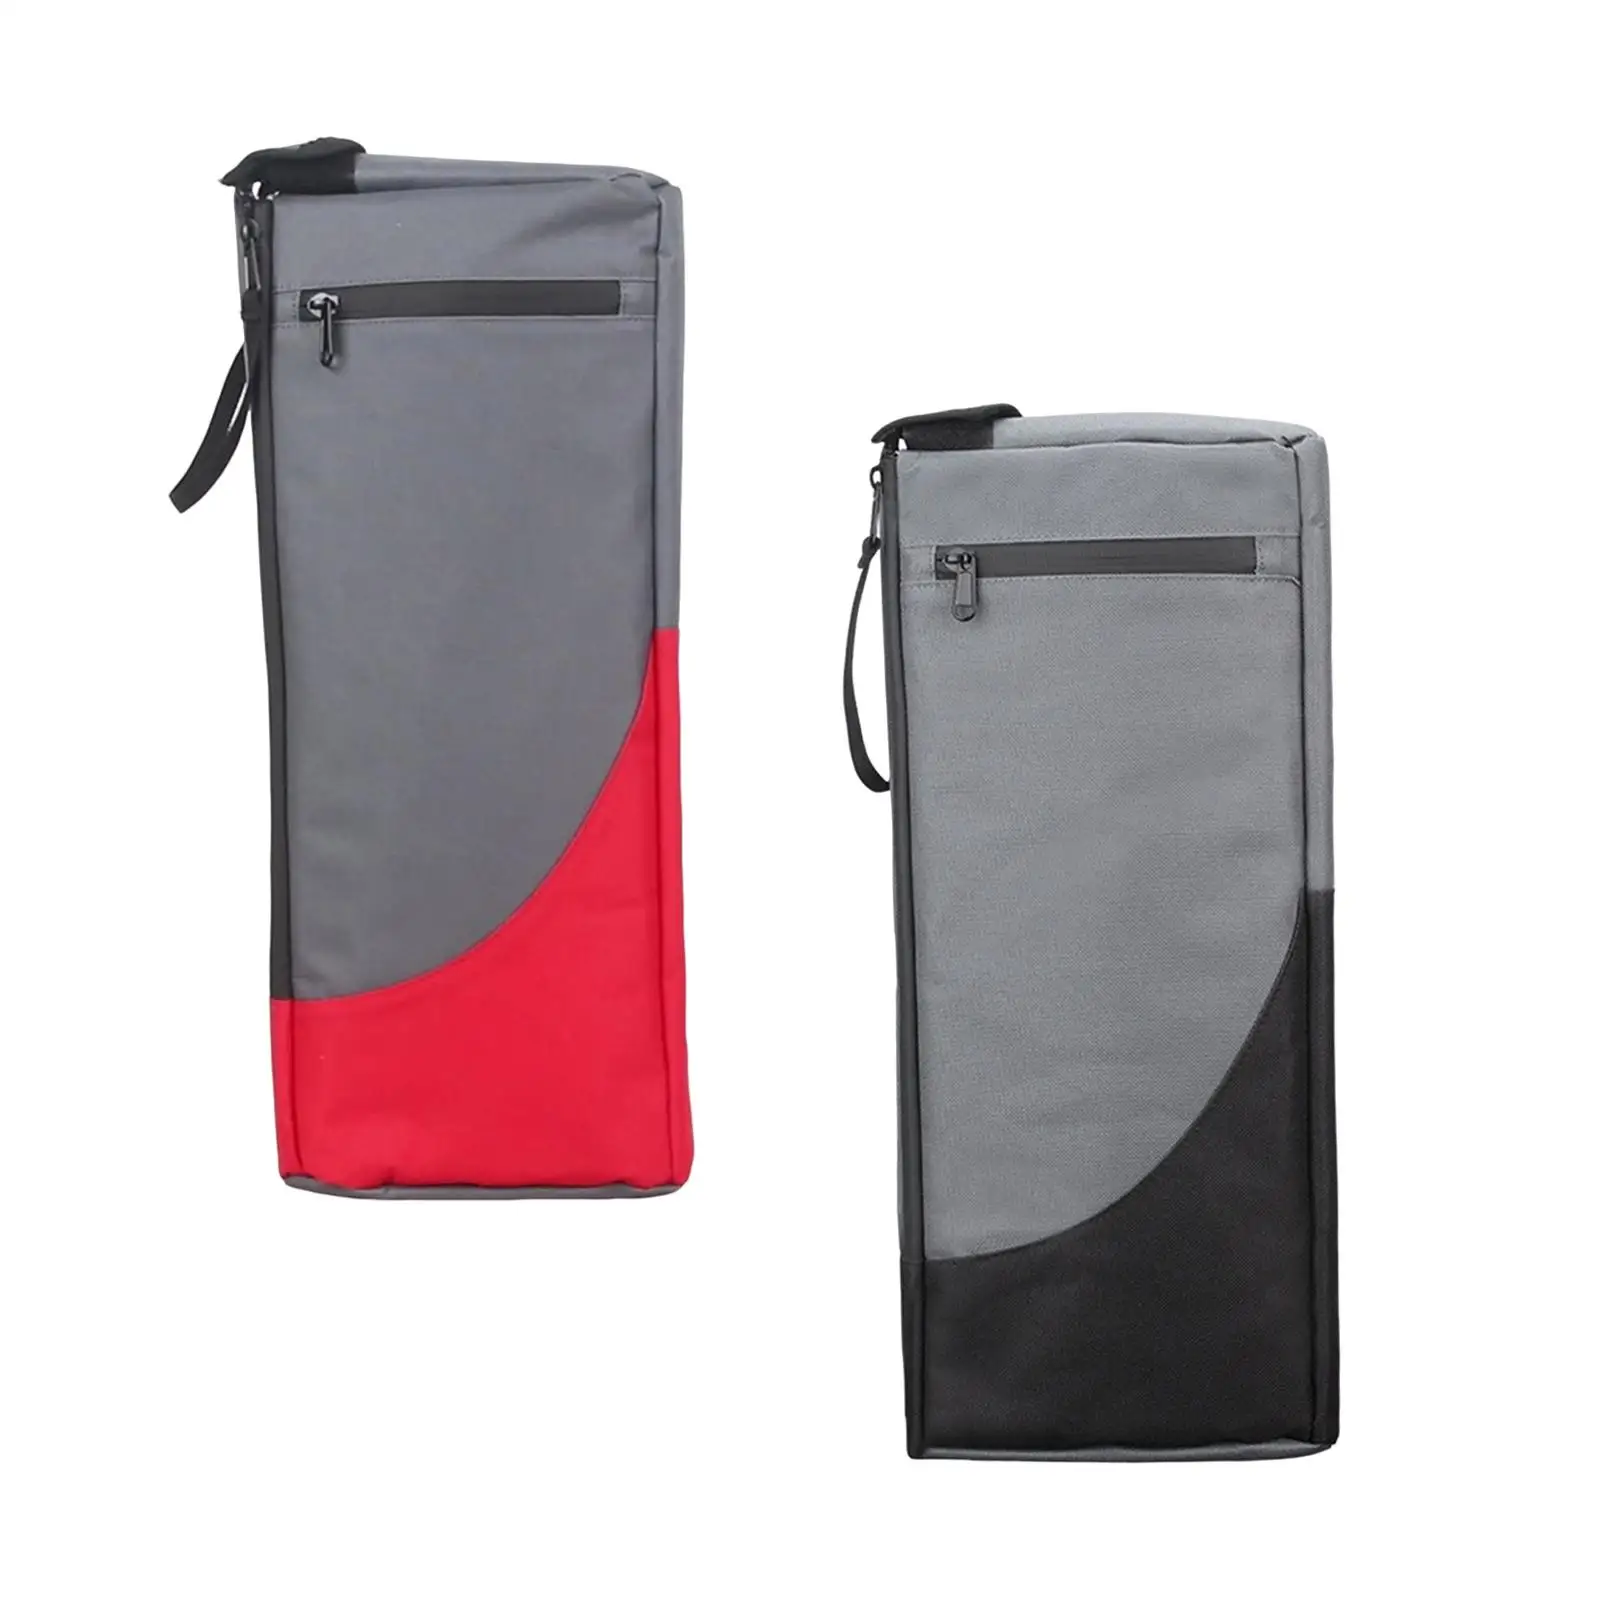 Portable Golf Cooler Bag Picnic Storage Drink Carrier Box Insulation Bag Holds A 6 Pack of Cans or Two Water Bottles